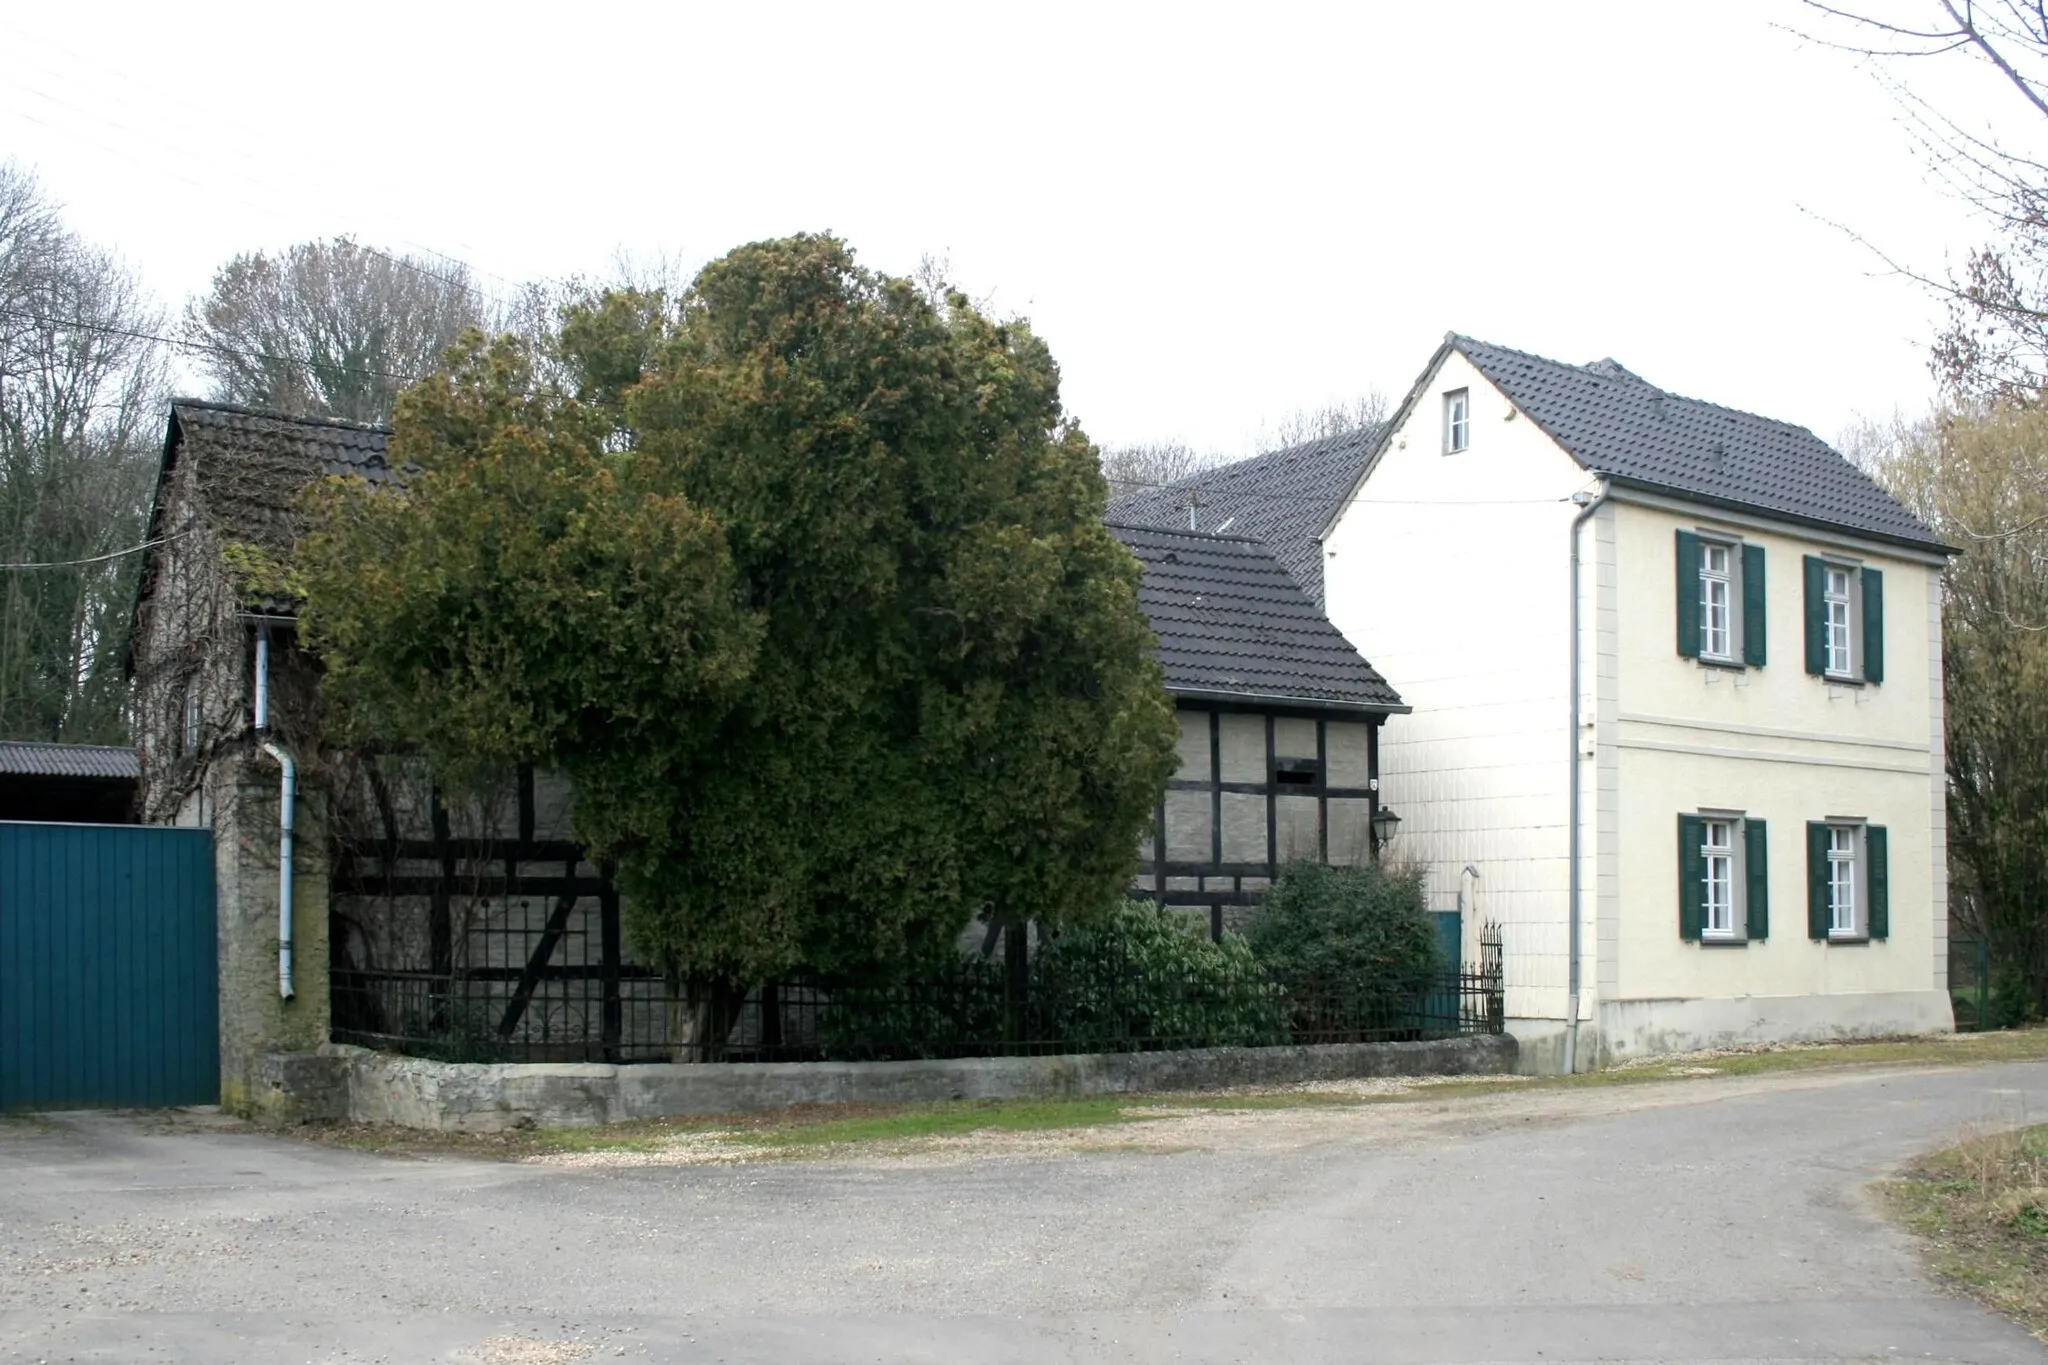 Photo showing: Cultural heritage monument No. Gla-04 in Vettweiß